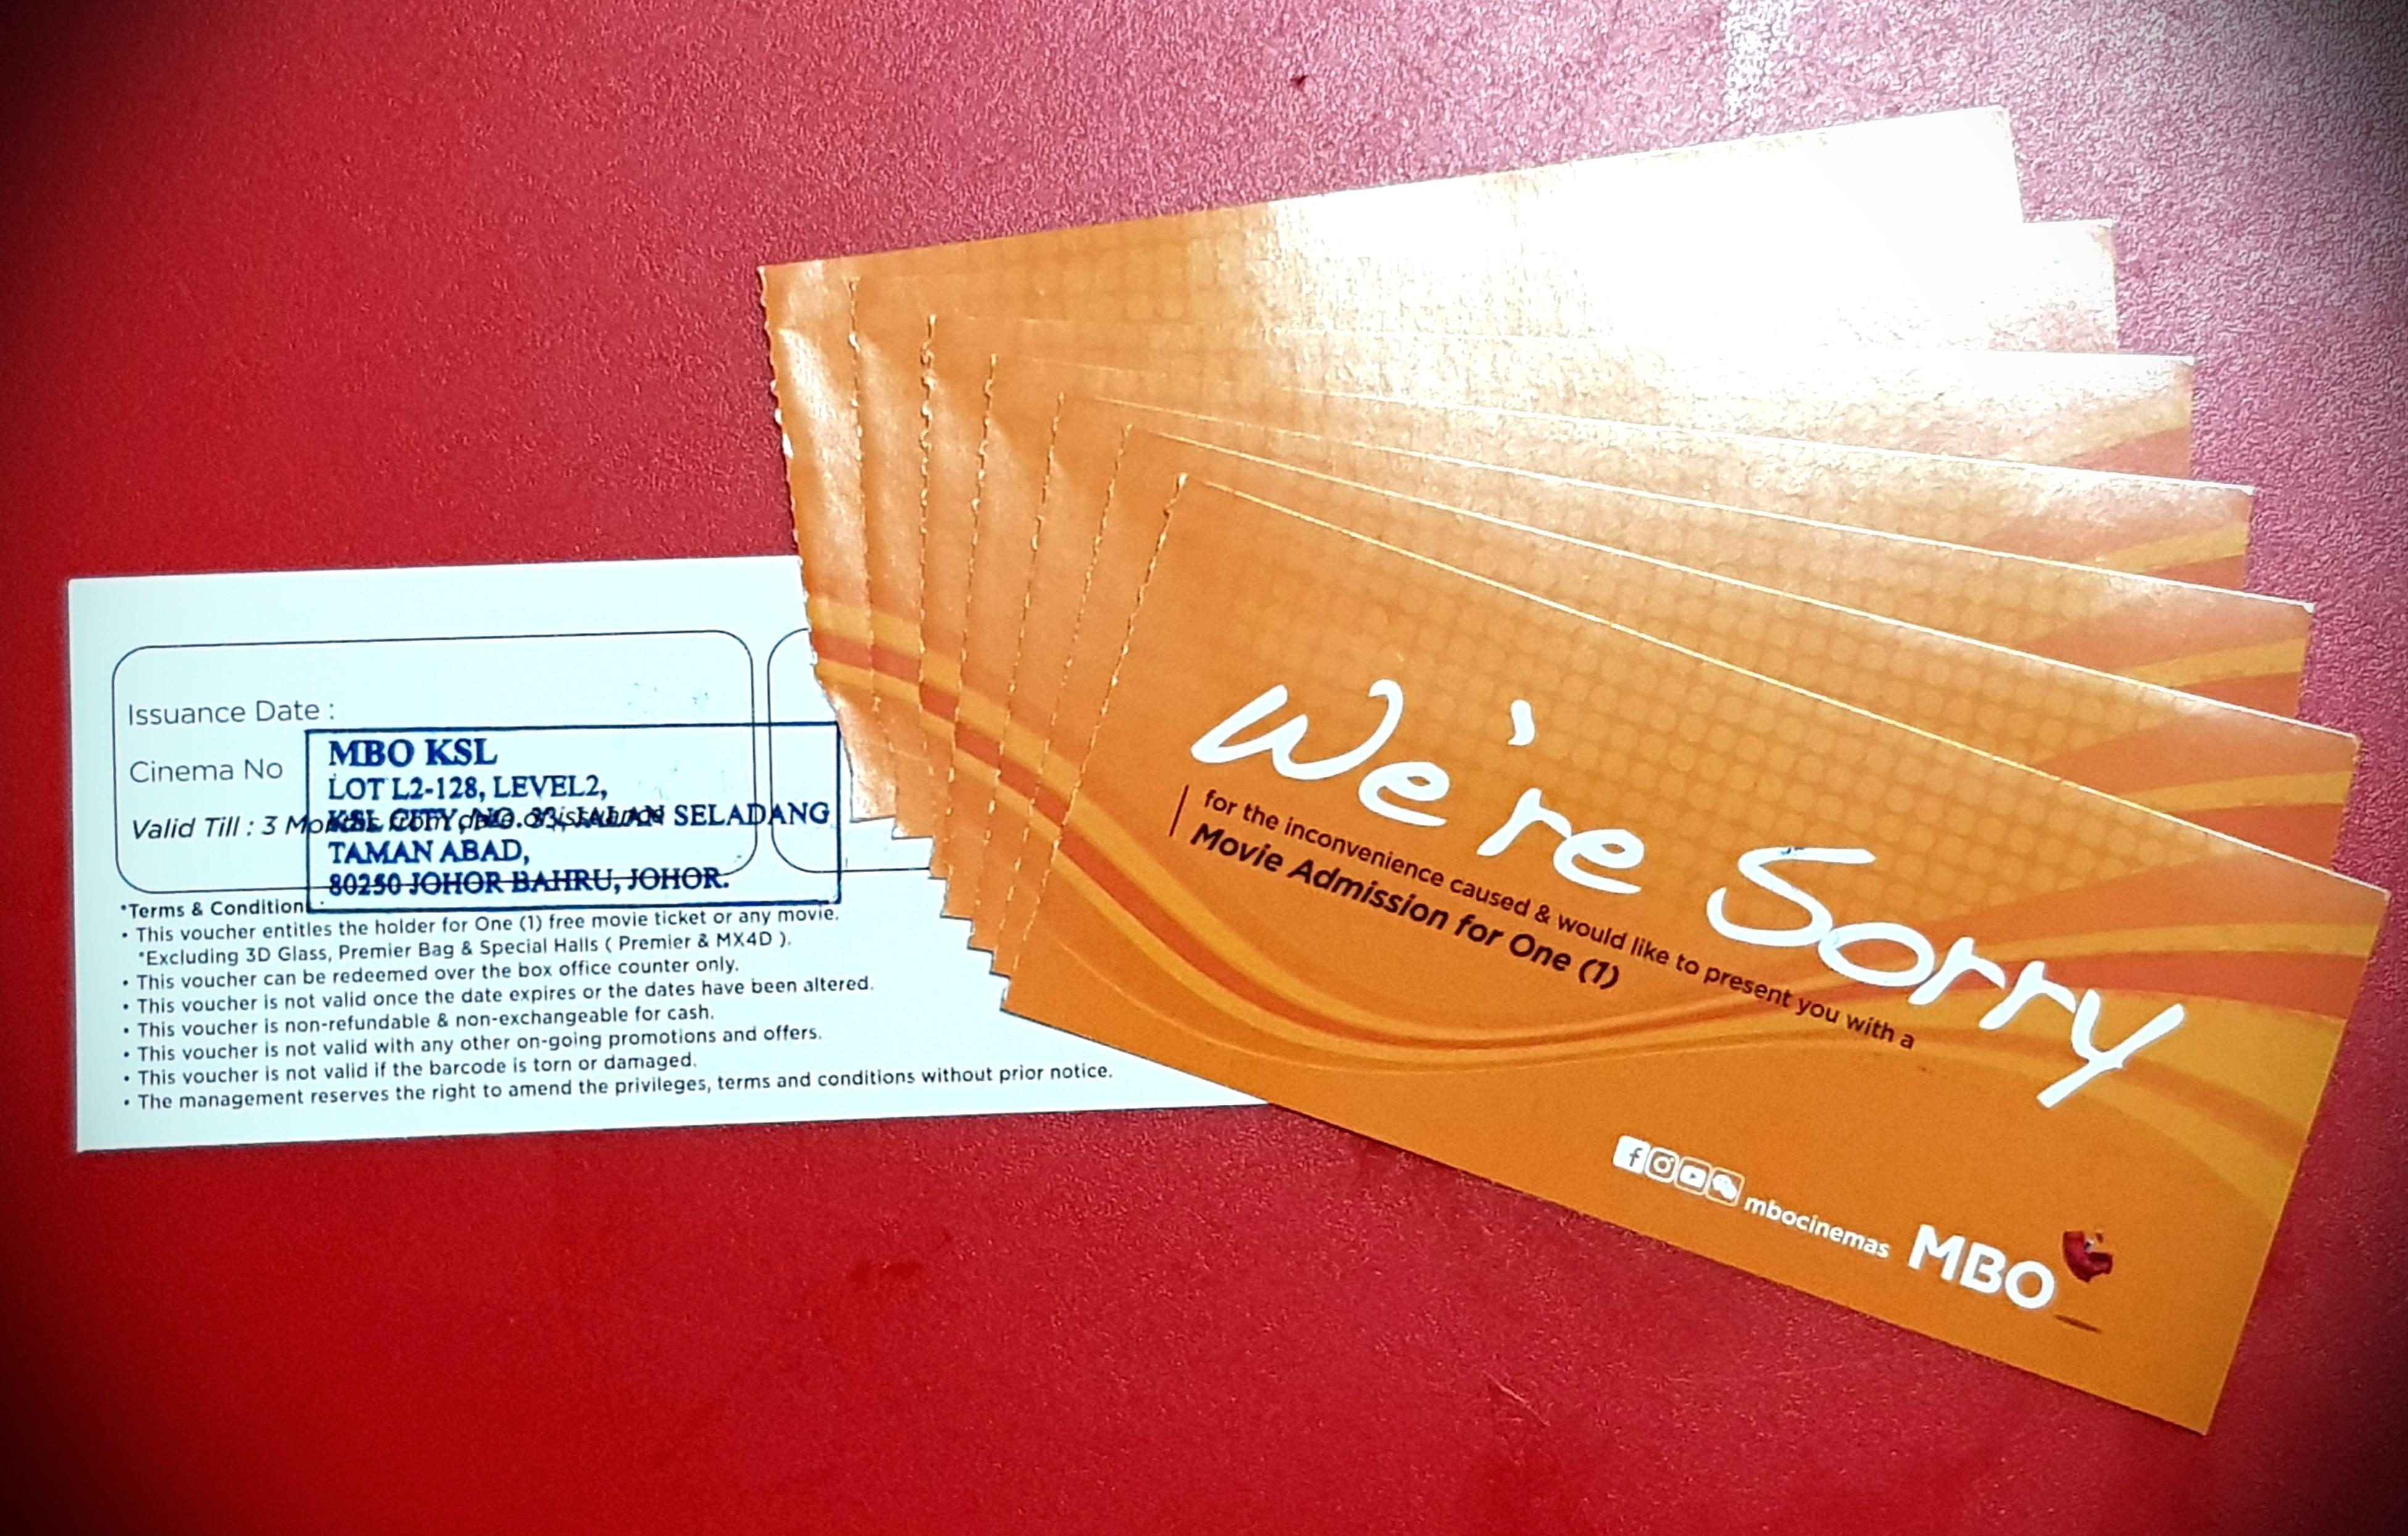 Mbo Movie Tickets Ksl City U Mall Entertainment Gift Cards Vouchers On Carousell